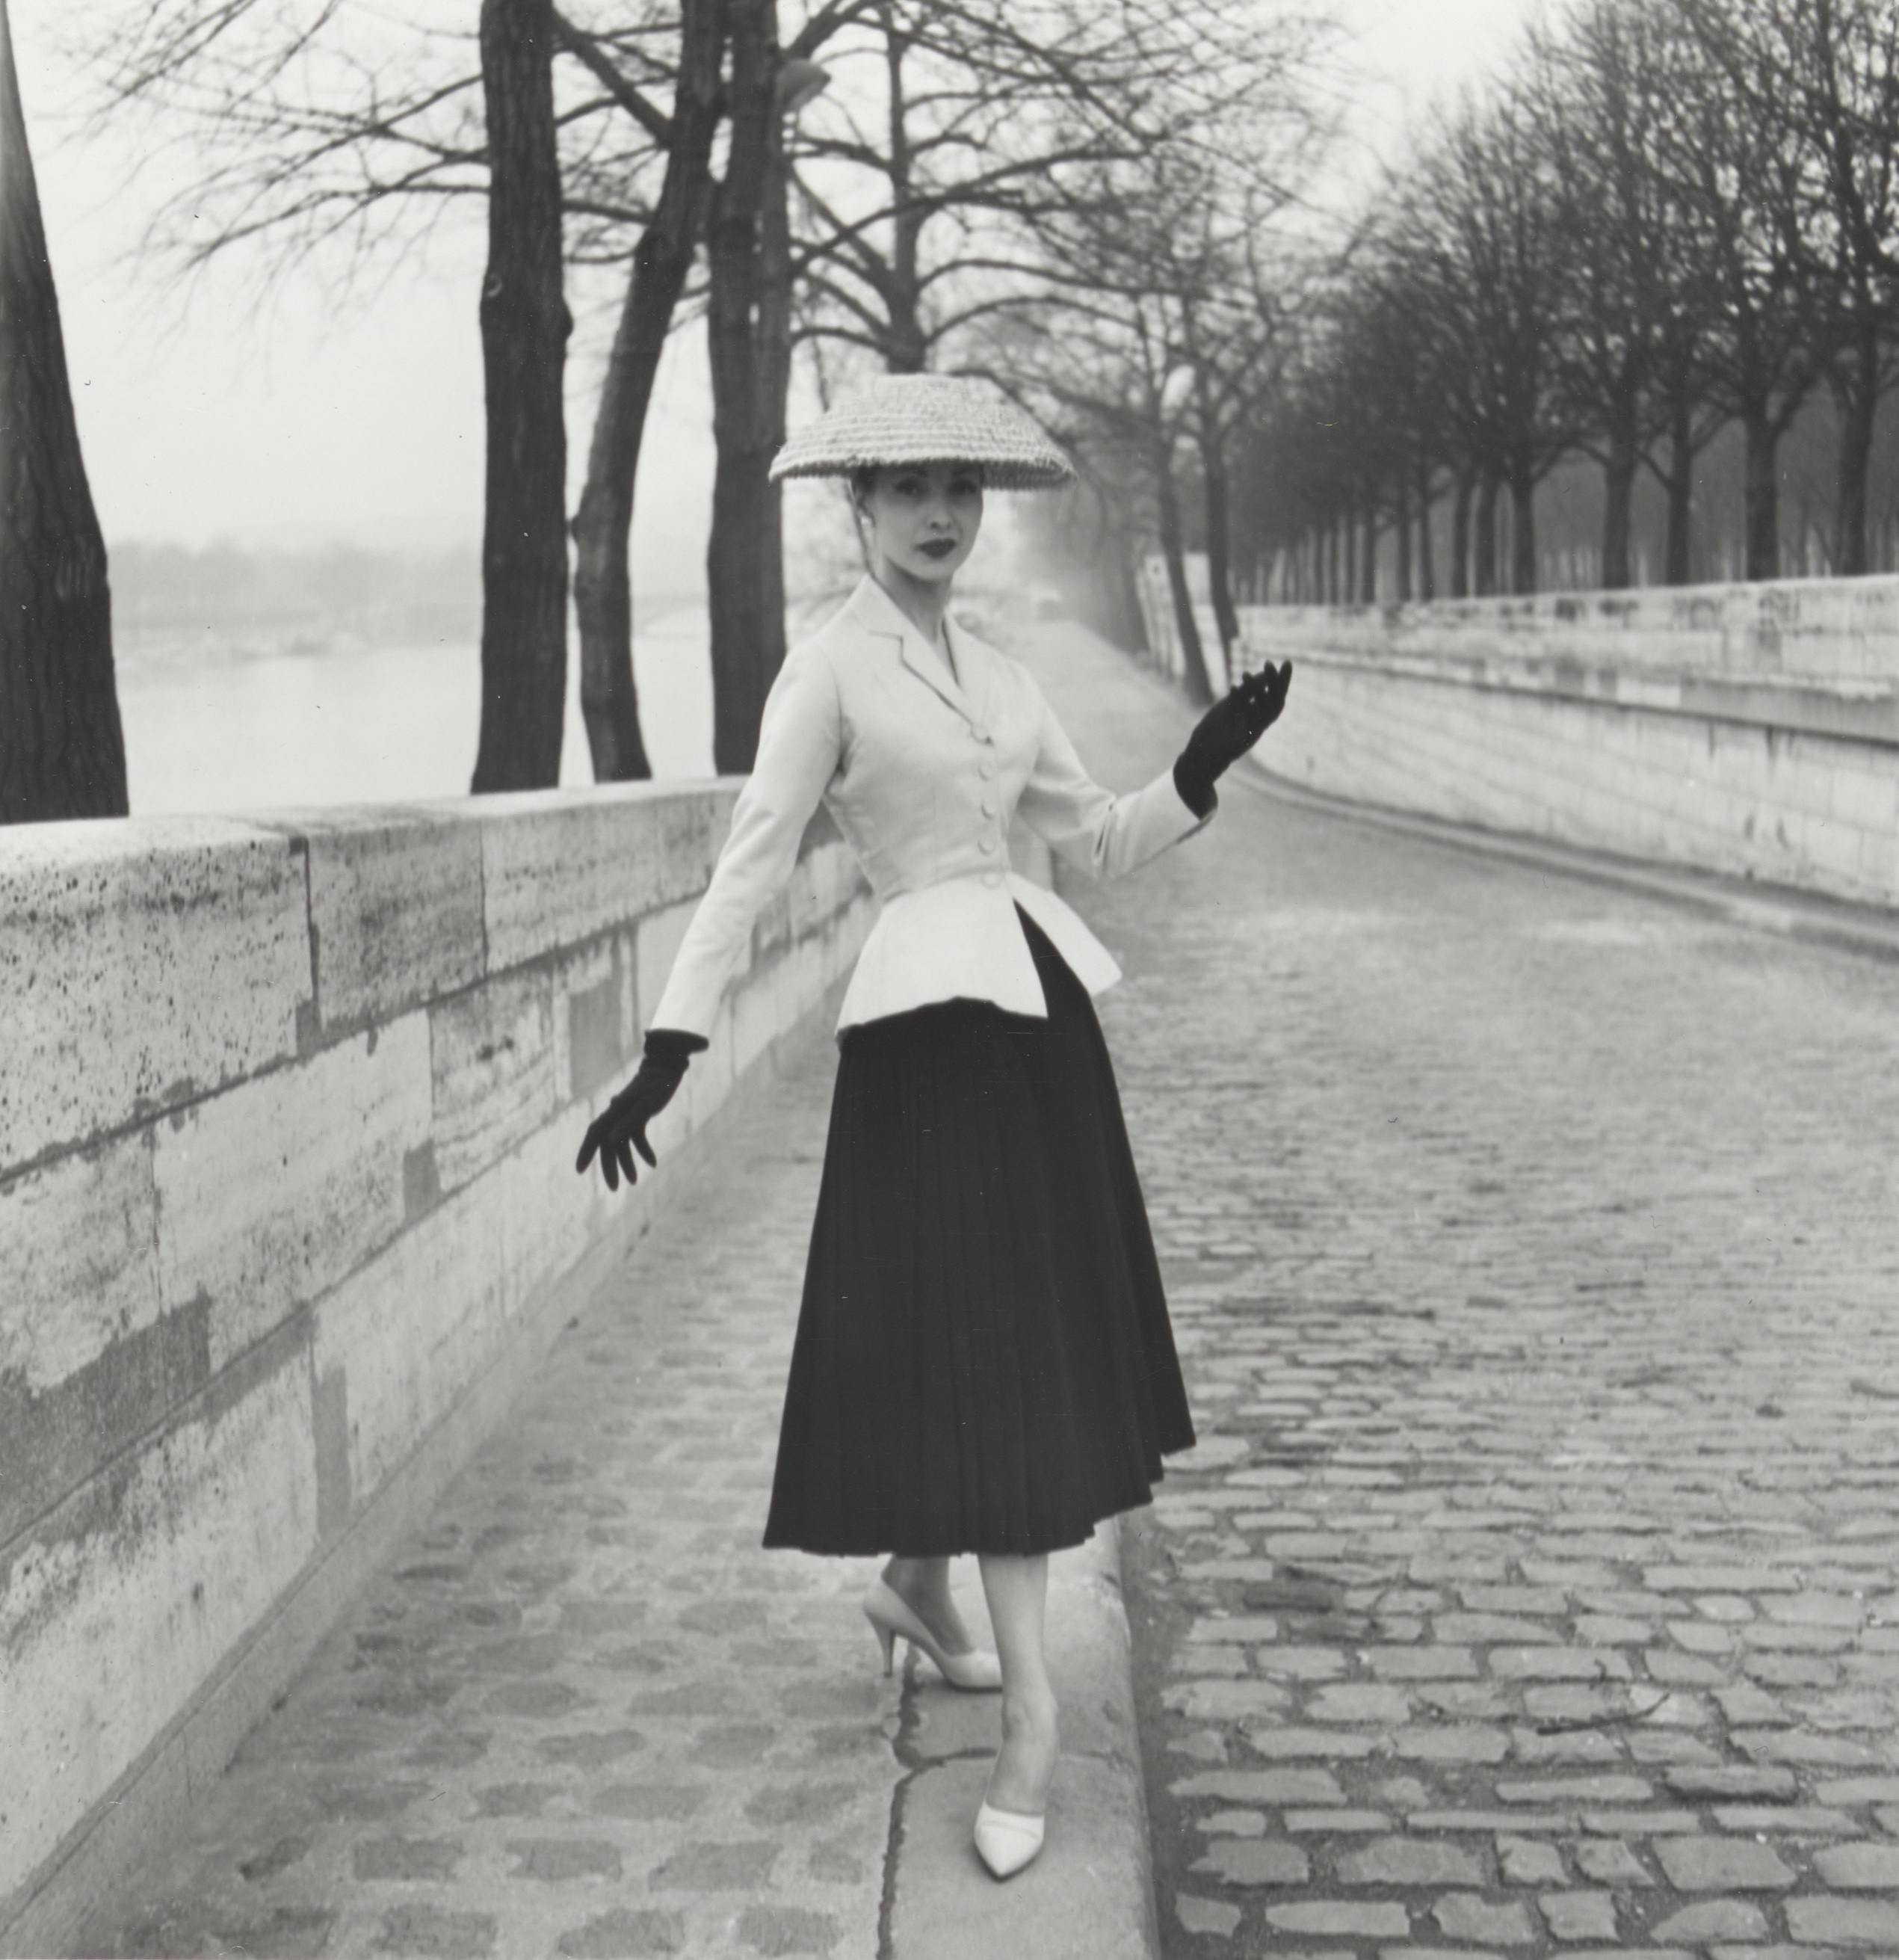 Christian Dior: In Memory of the New Look - France Today